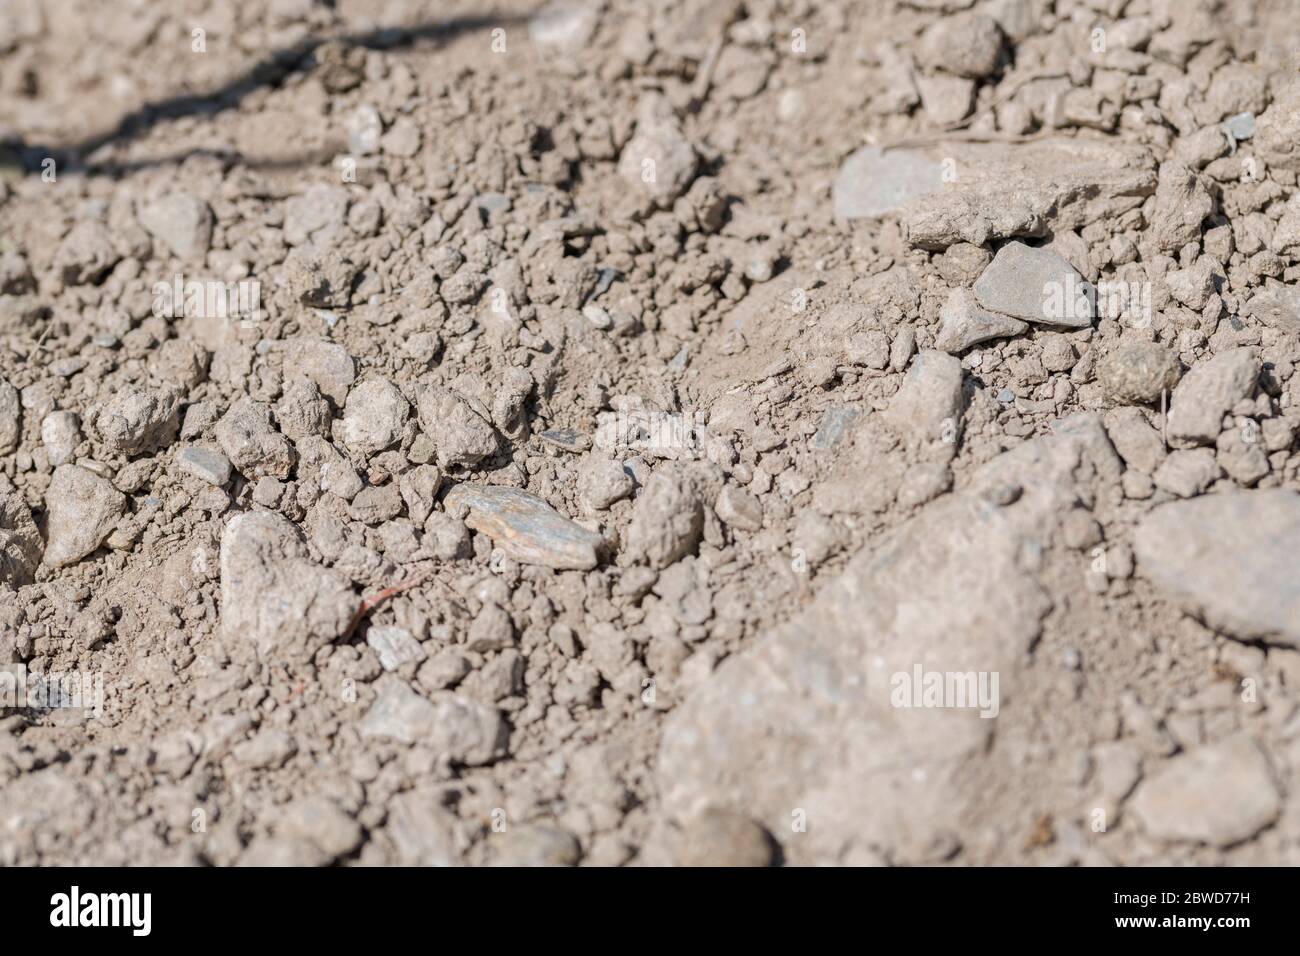 Lumps of dry soil in tilled / ploughed field. For scorched earth, World Water Day, drought in UK, bone-dry, parched soil, lifeless soil structure. Stock Photo